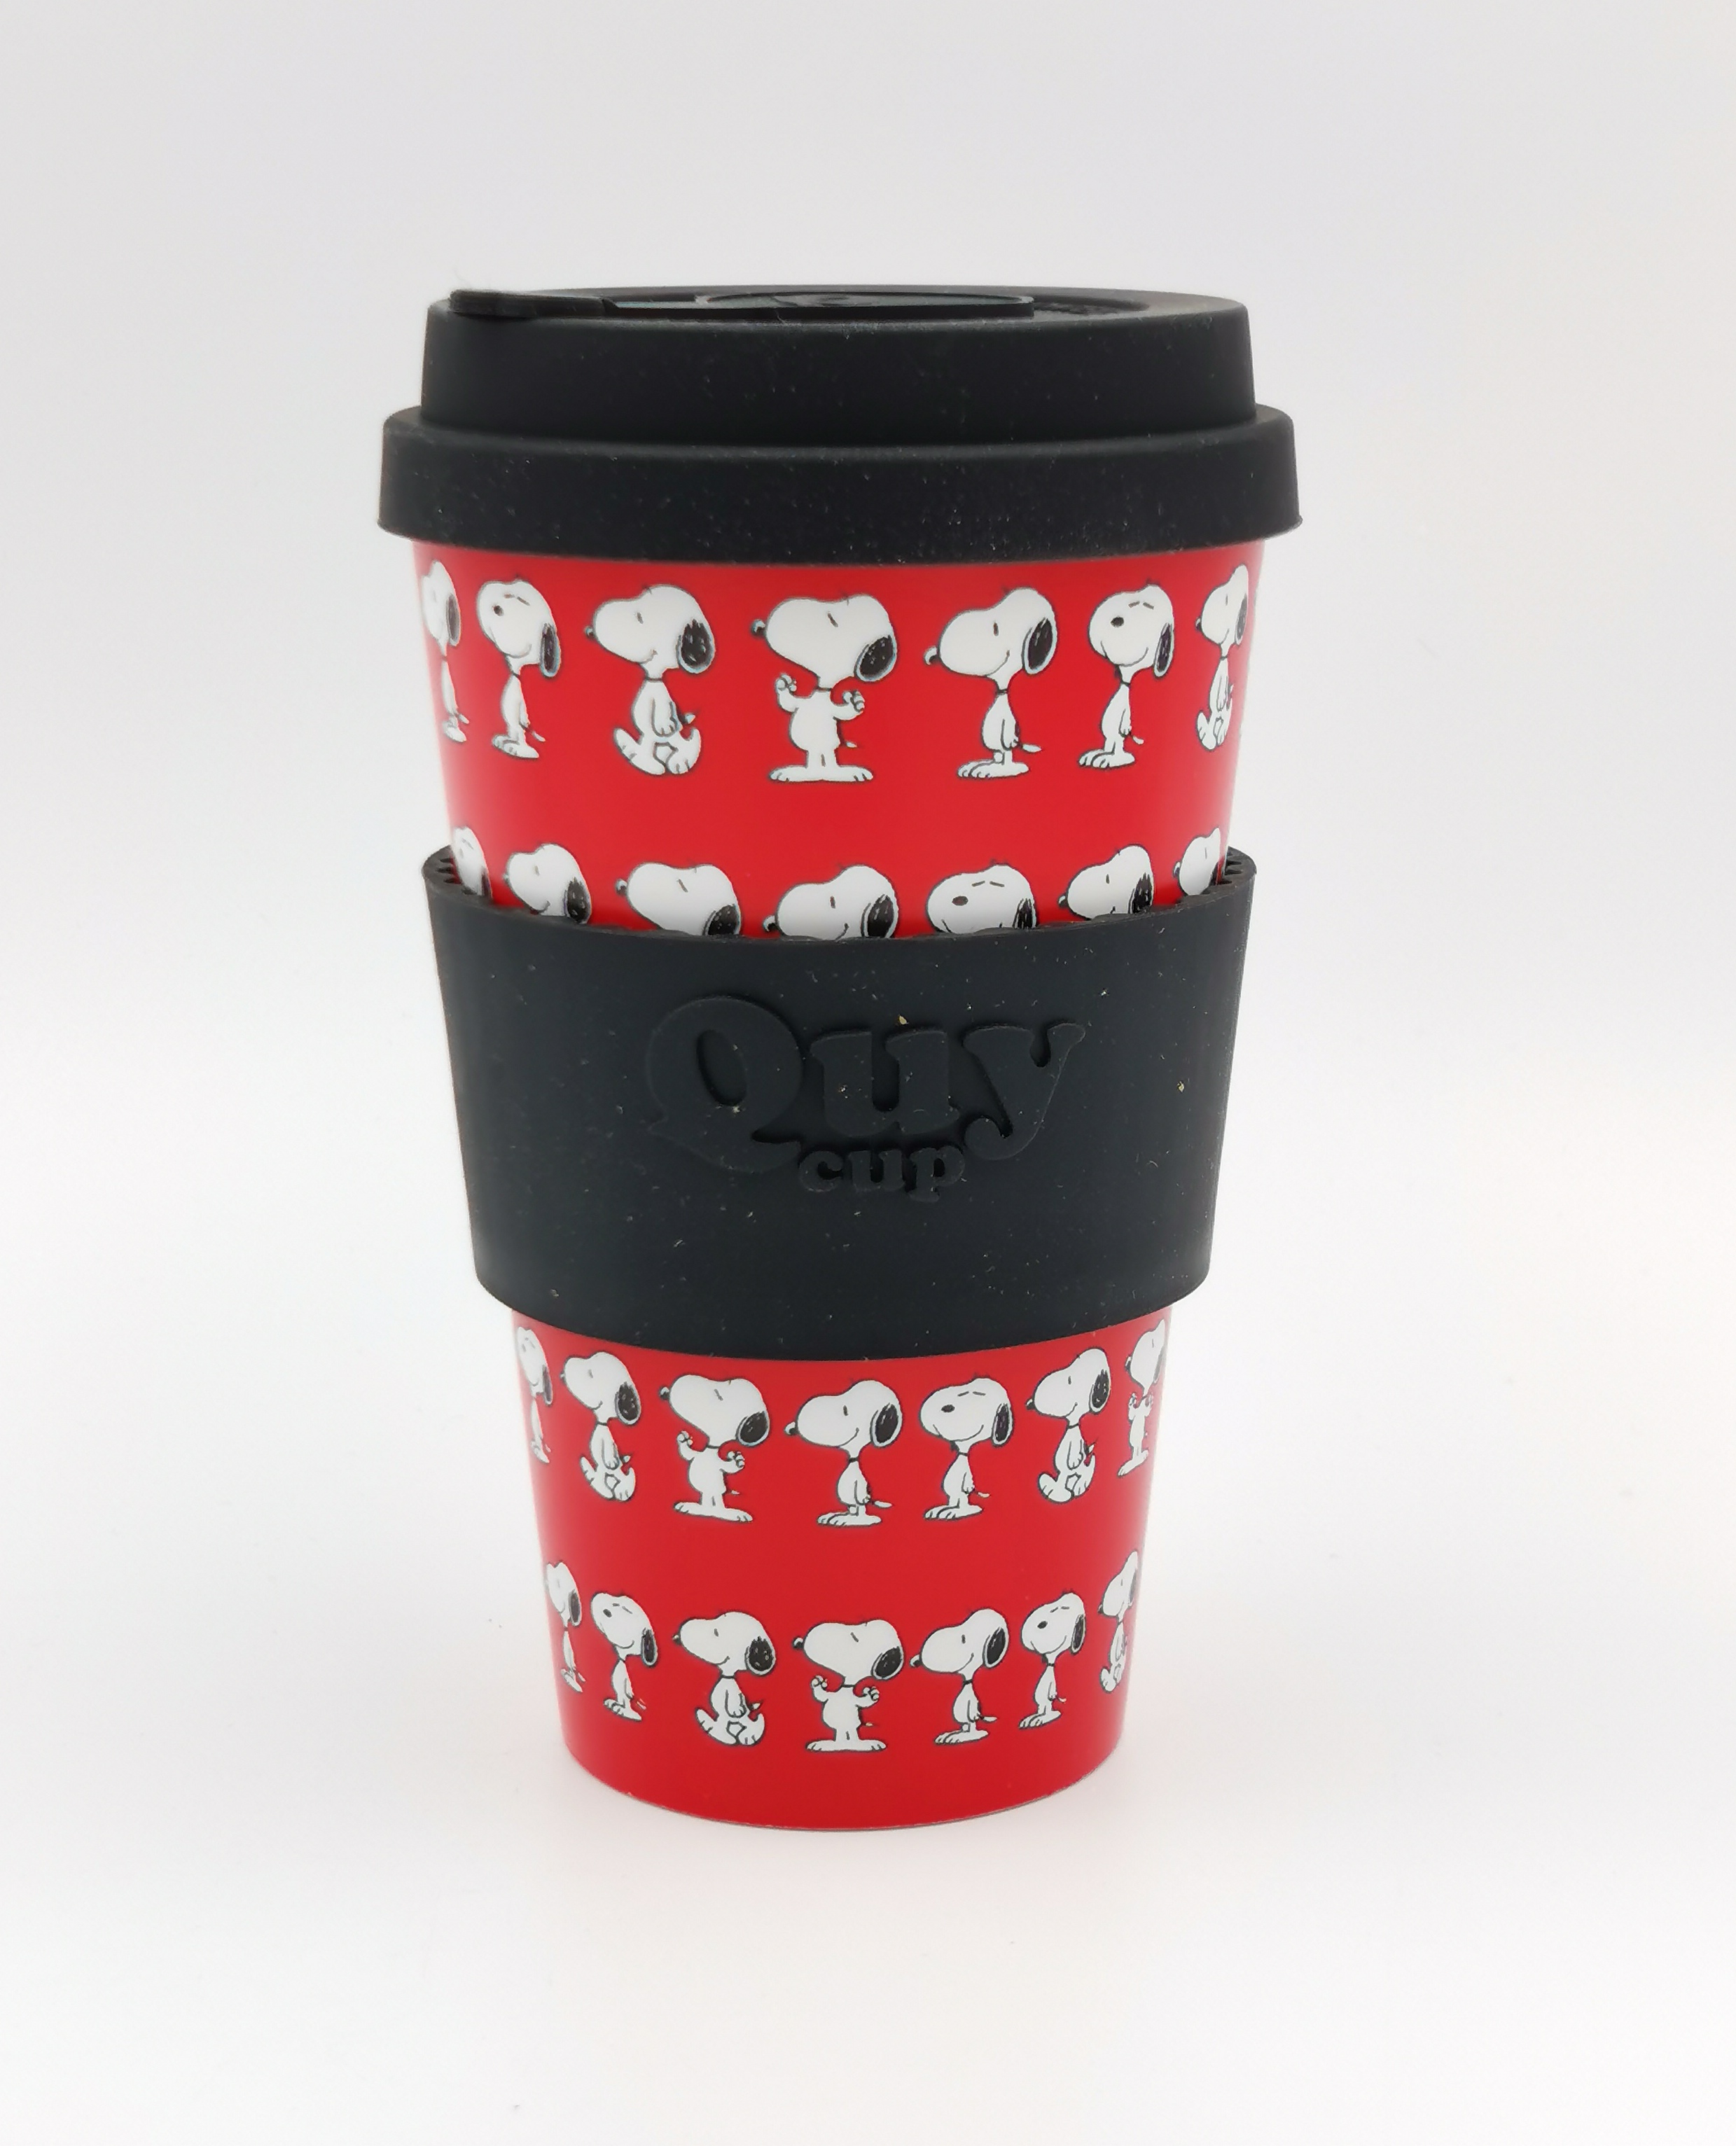 Mugs in R-PET Quy Cup PLASTIC and 100% recyclable 400ml QUY CUP